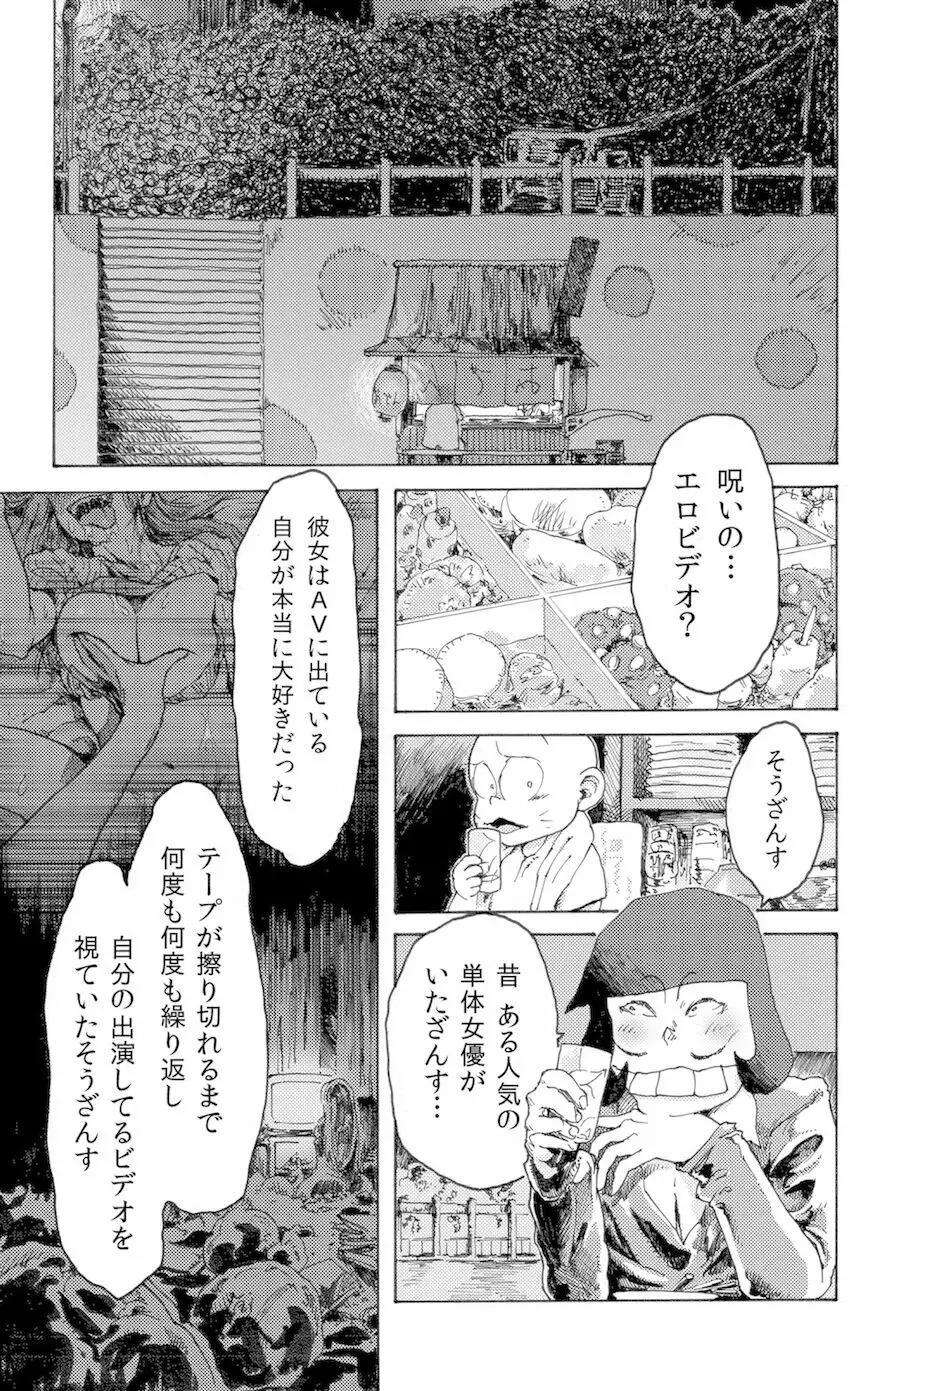 WEB再録【R18G】「AIN'T SIX IS DEATH」 - page2